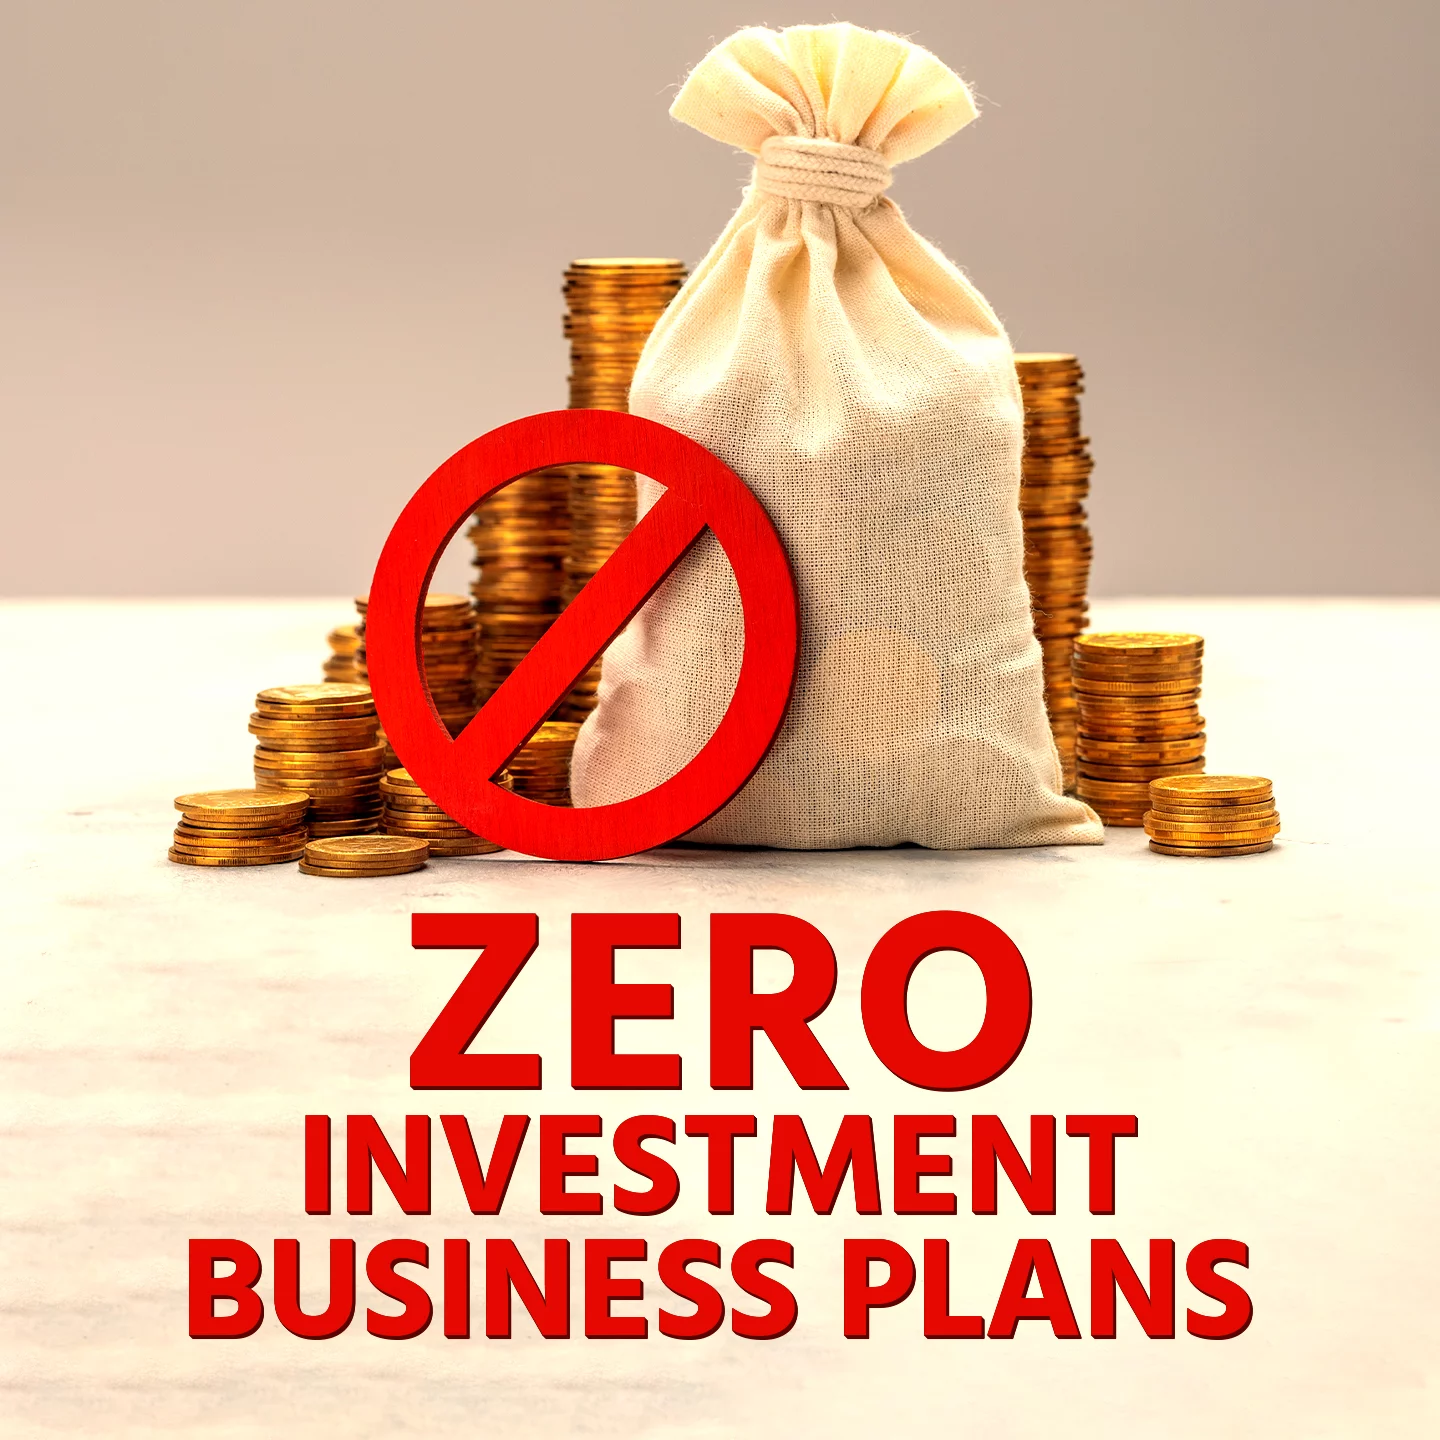 business plans with zero investment